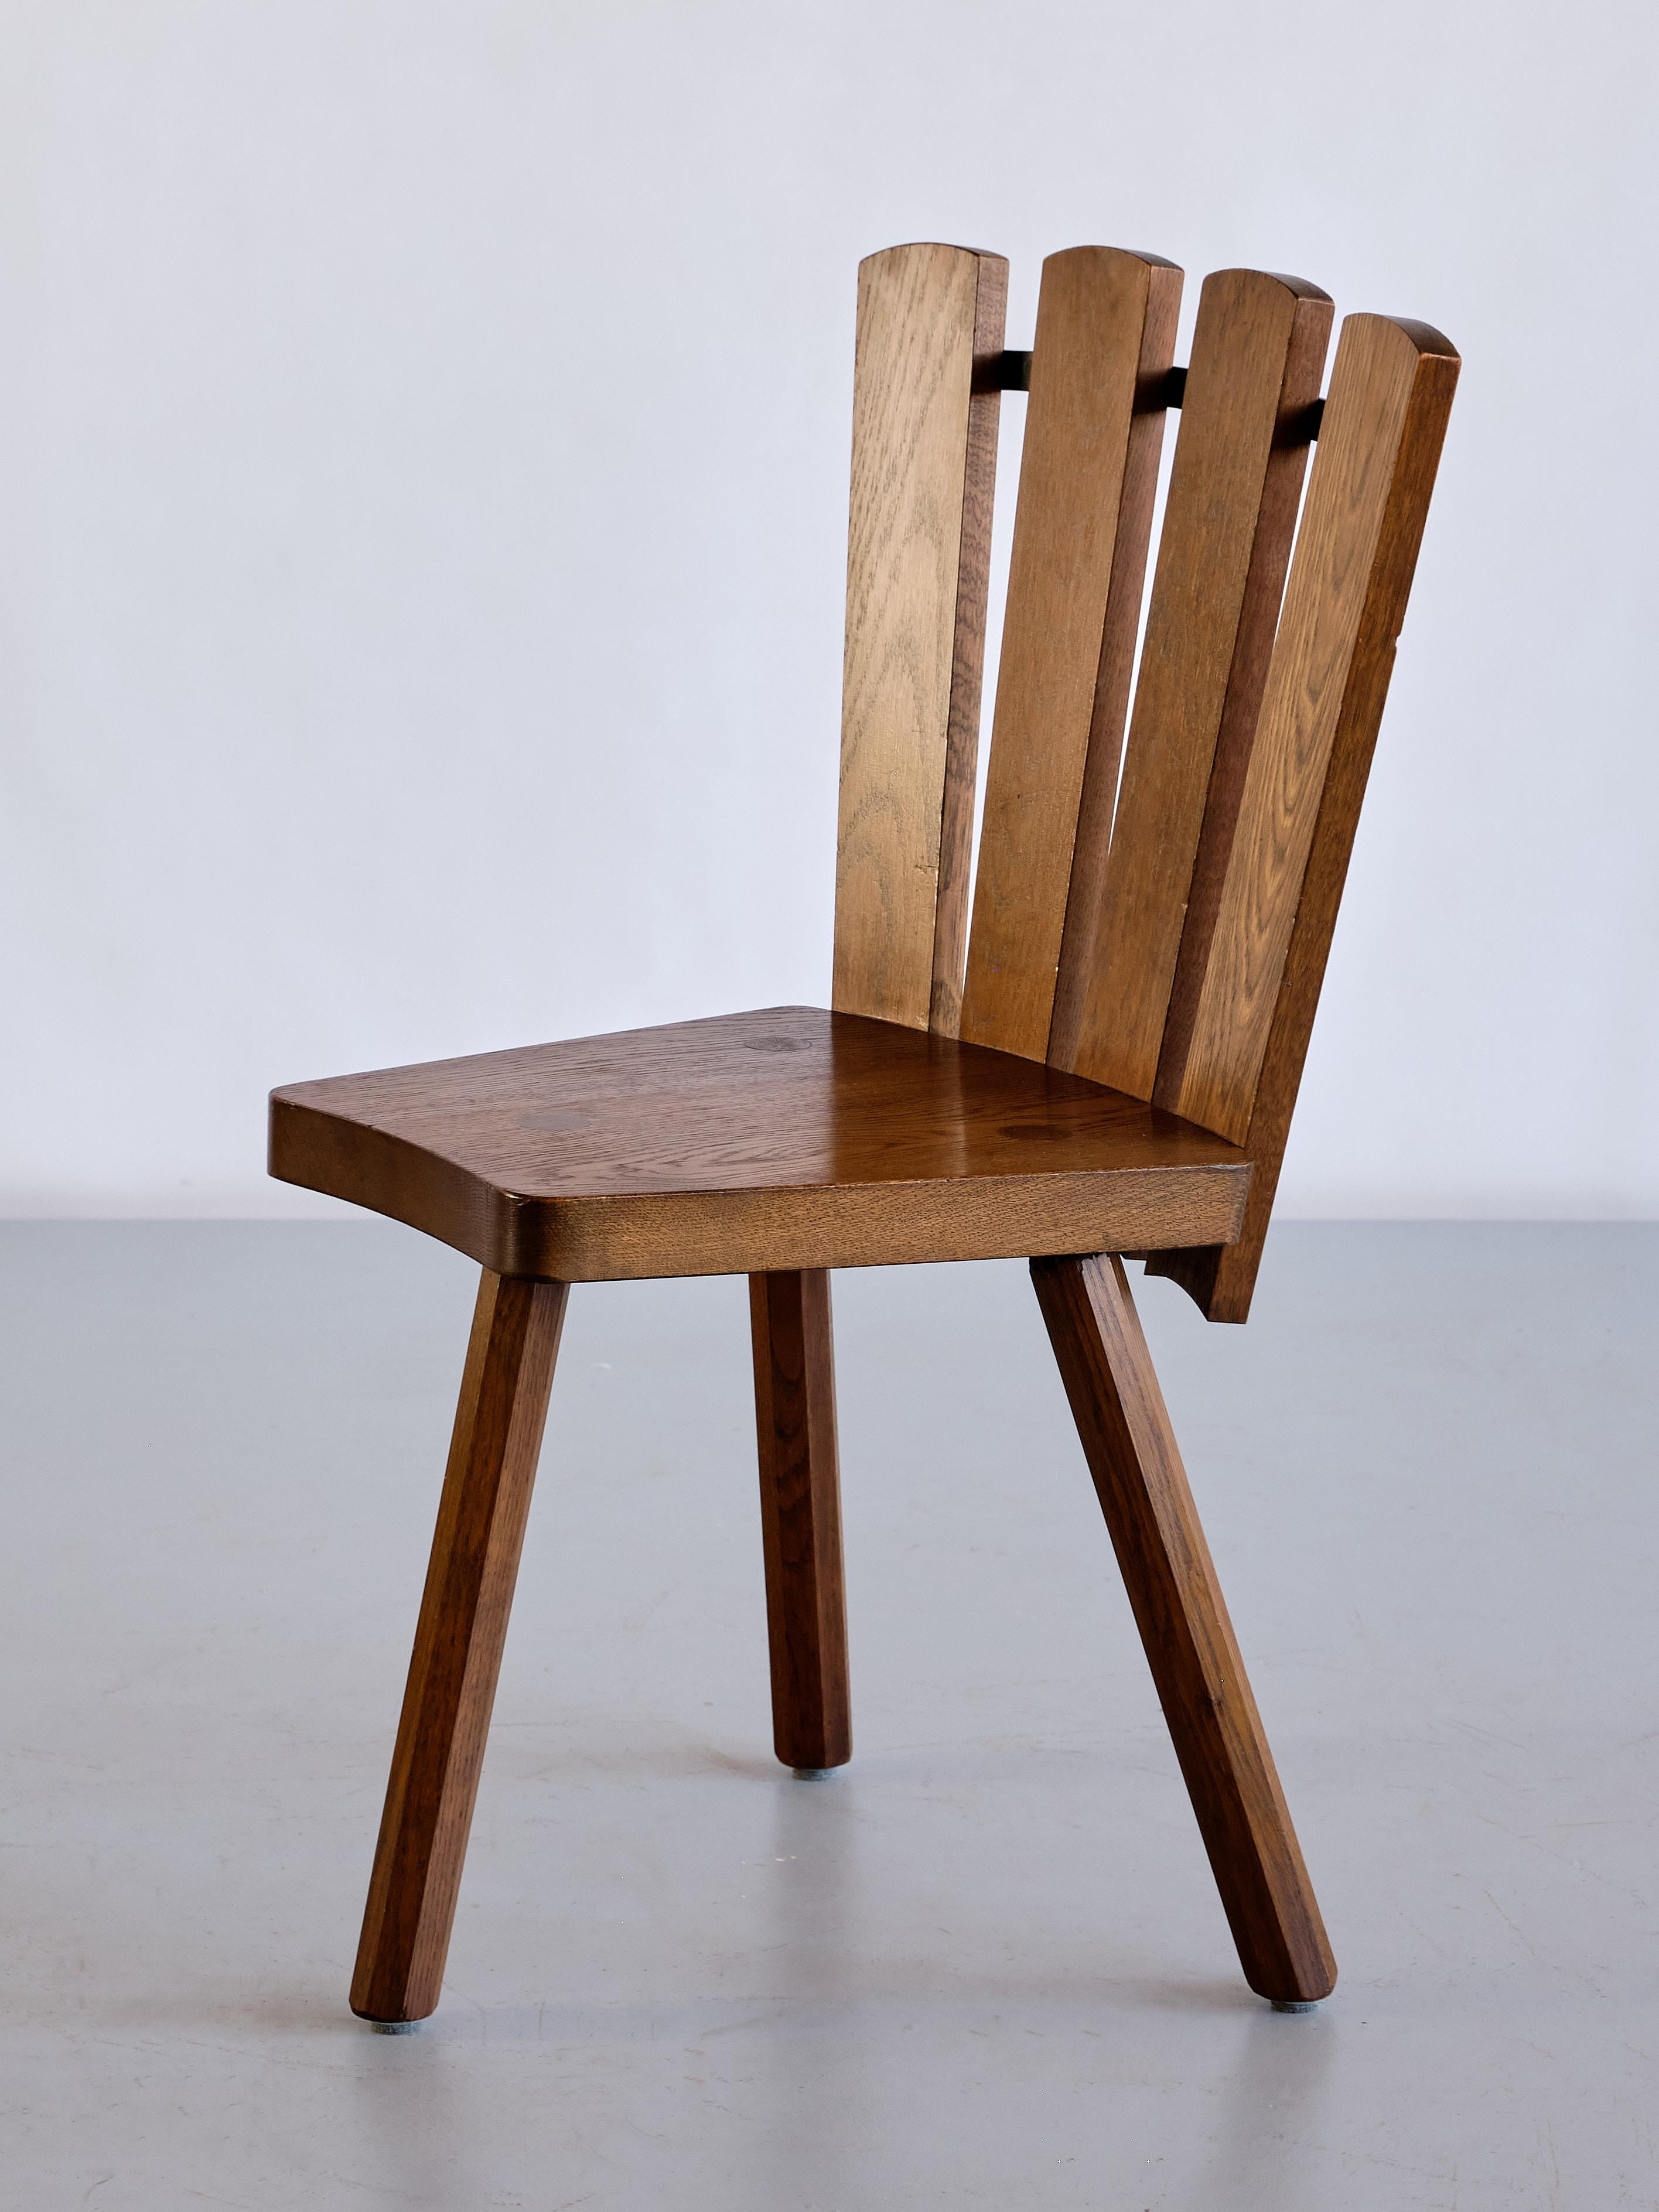 Set of Four French Modern Tripod Oak Dining Chairs with Fan Shaped Back, 1950s For Sale 7